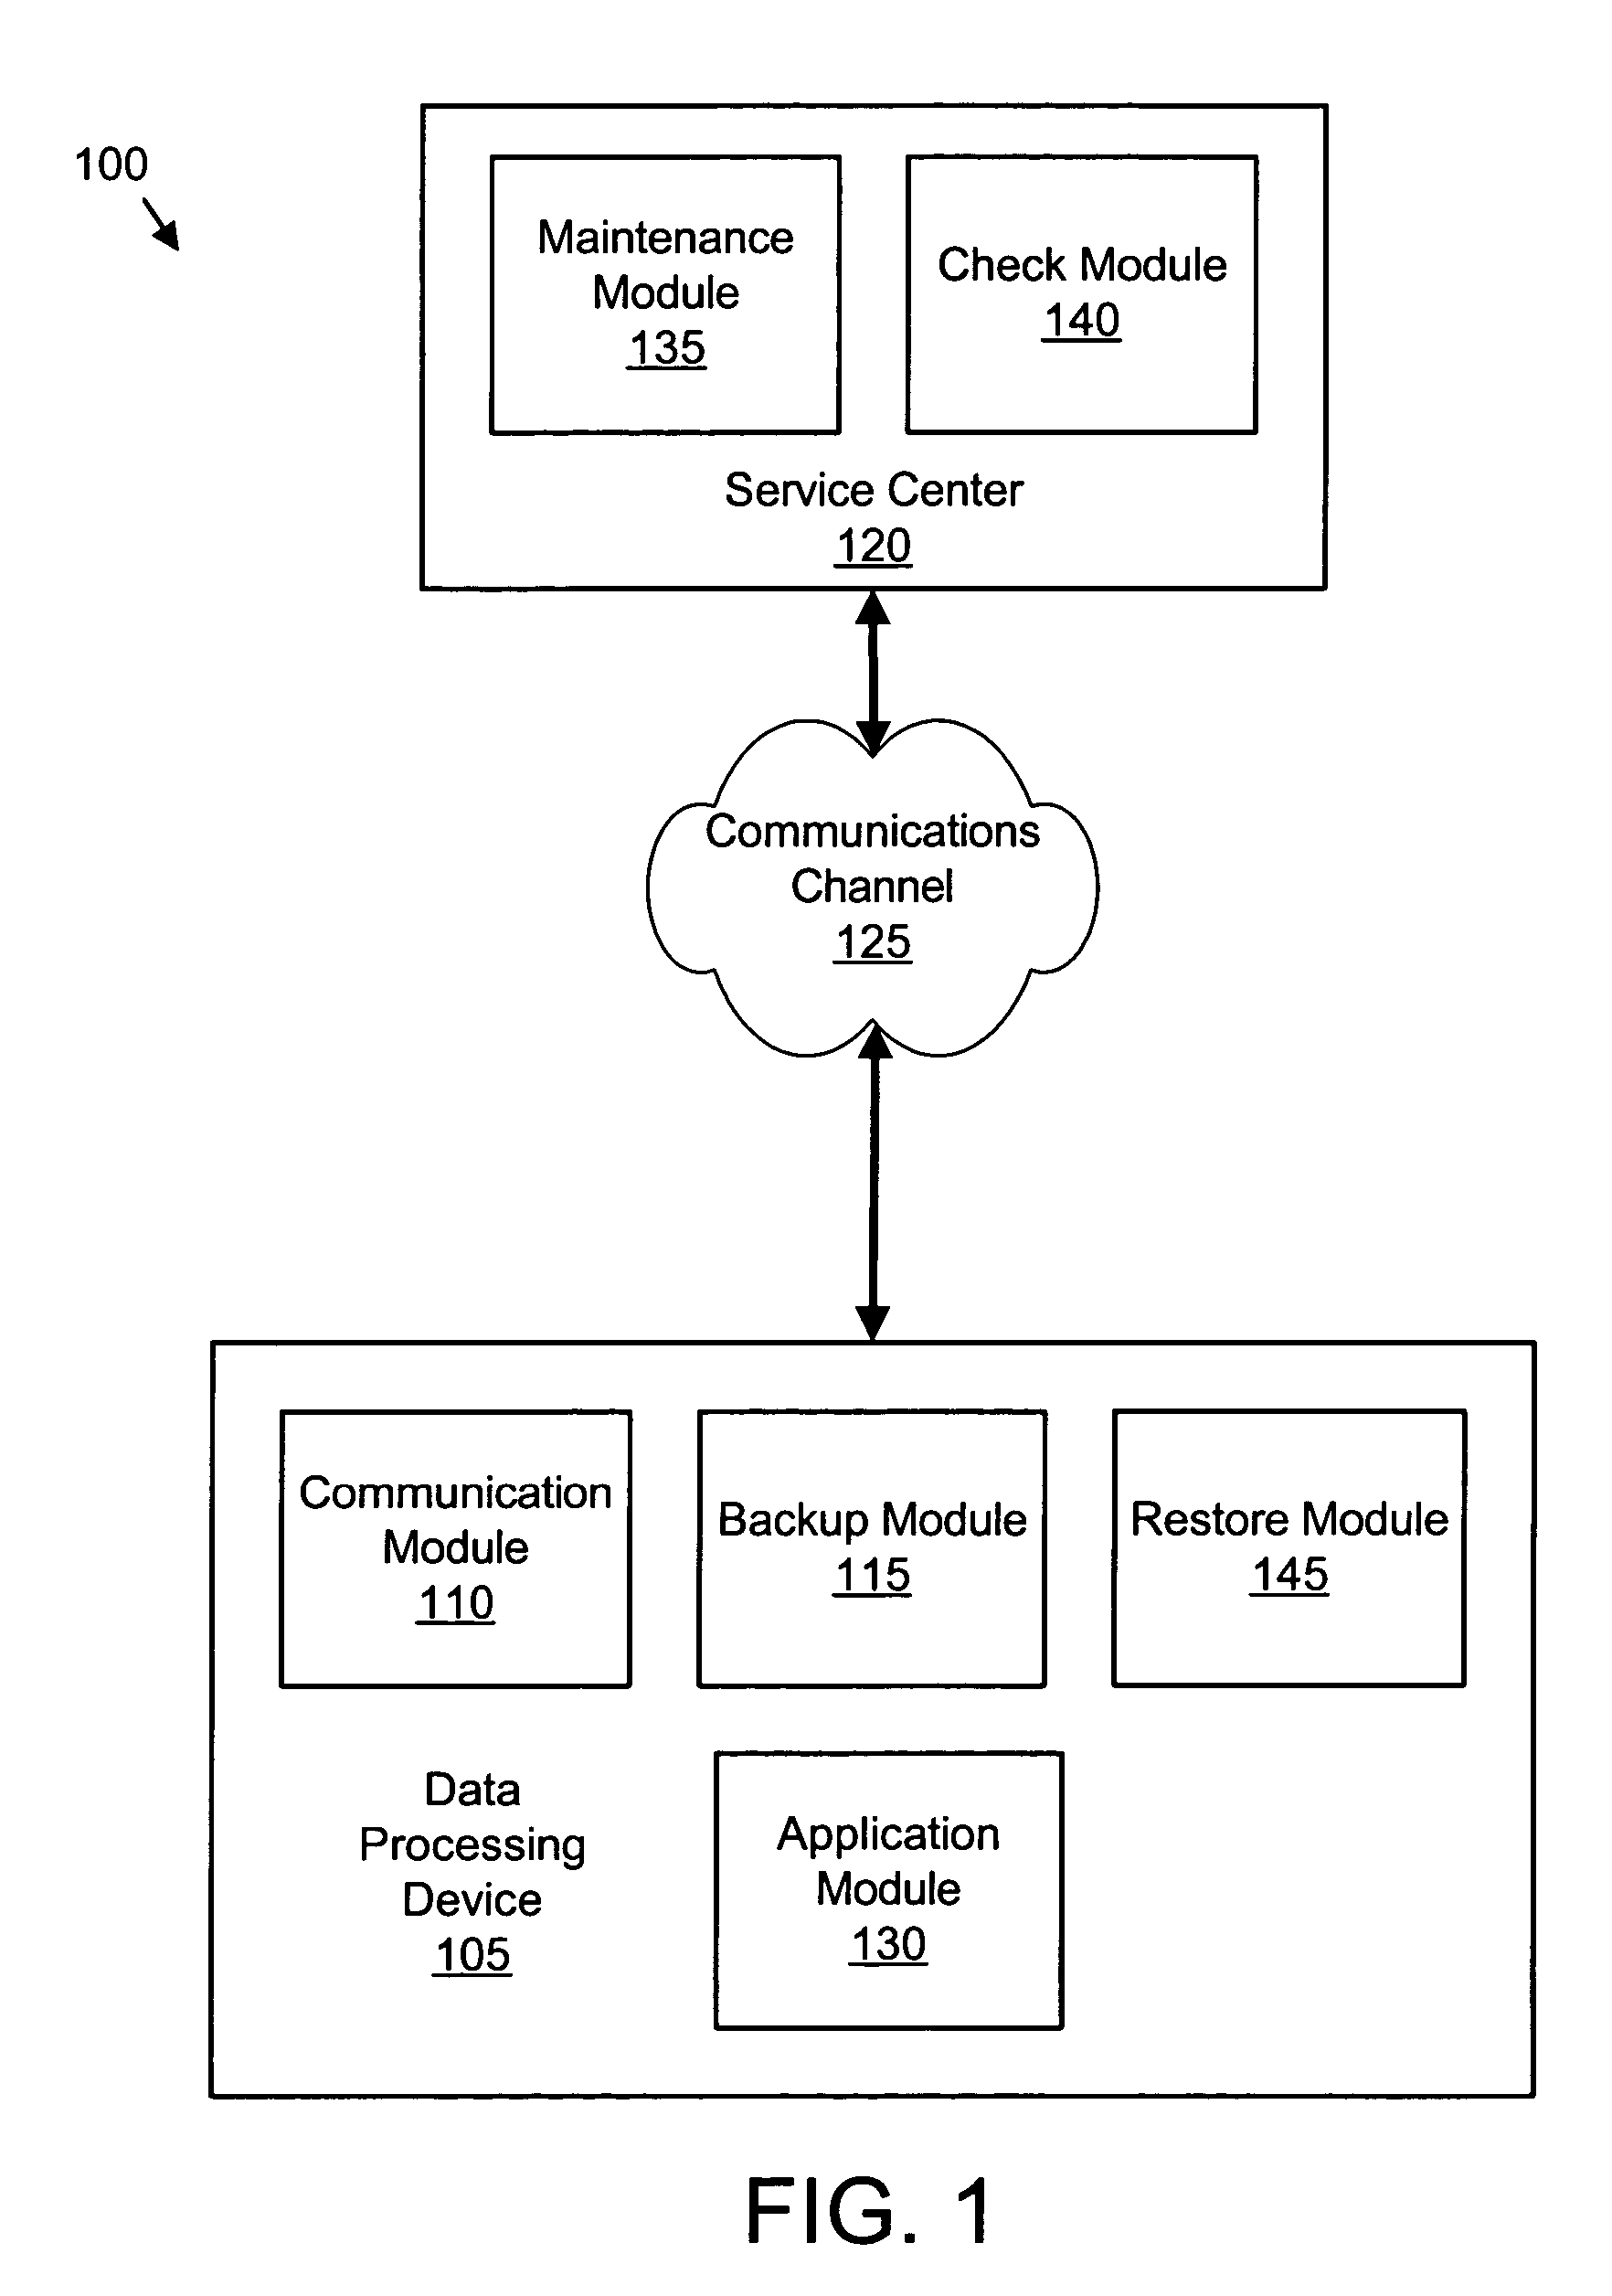 Apparatus, system, and method for backing up vital product data